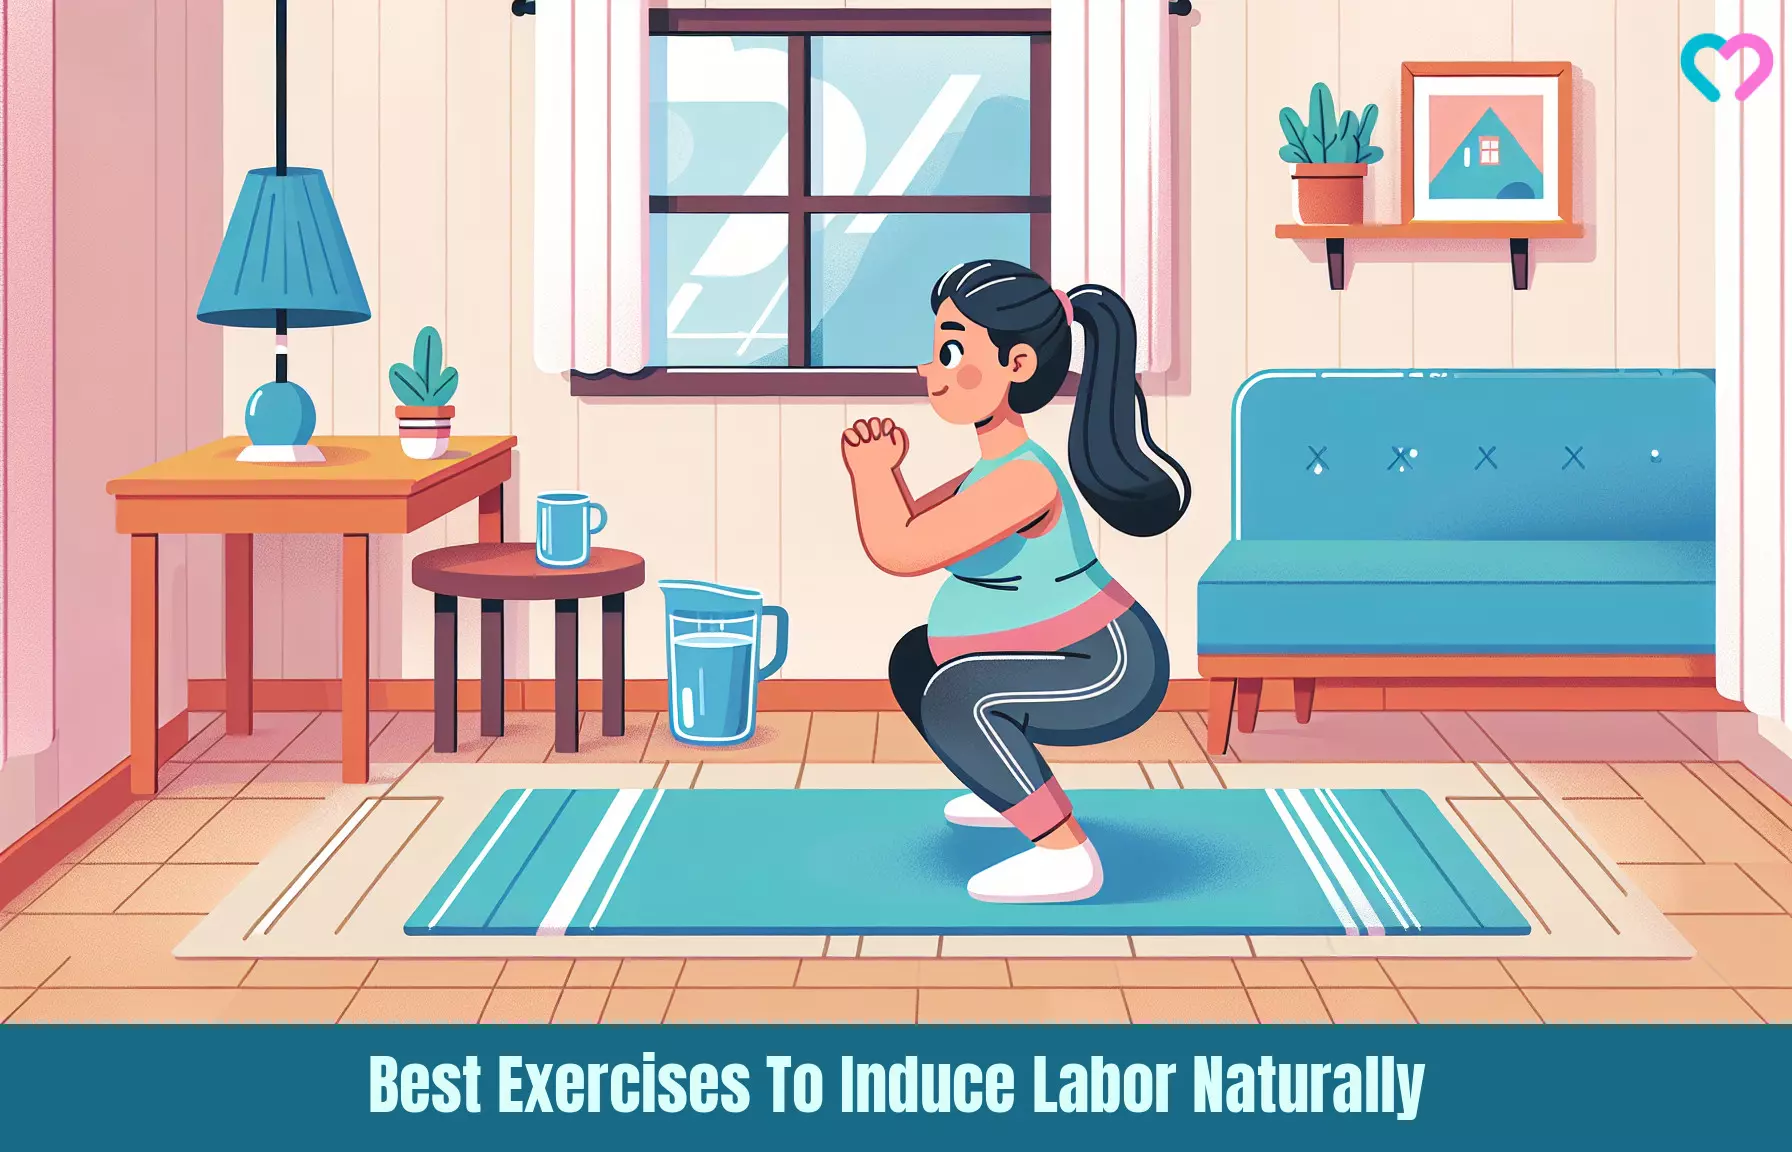 Exercises To Induce Labor Naturally_illustration